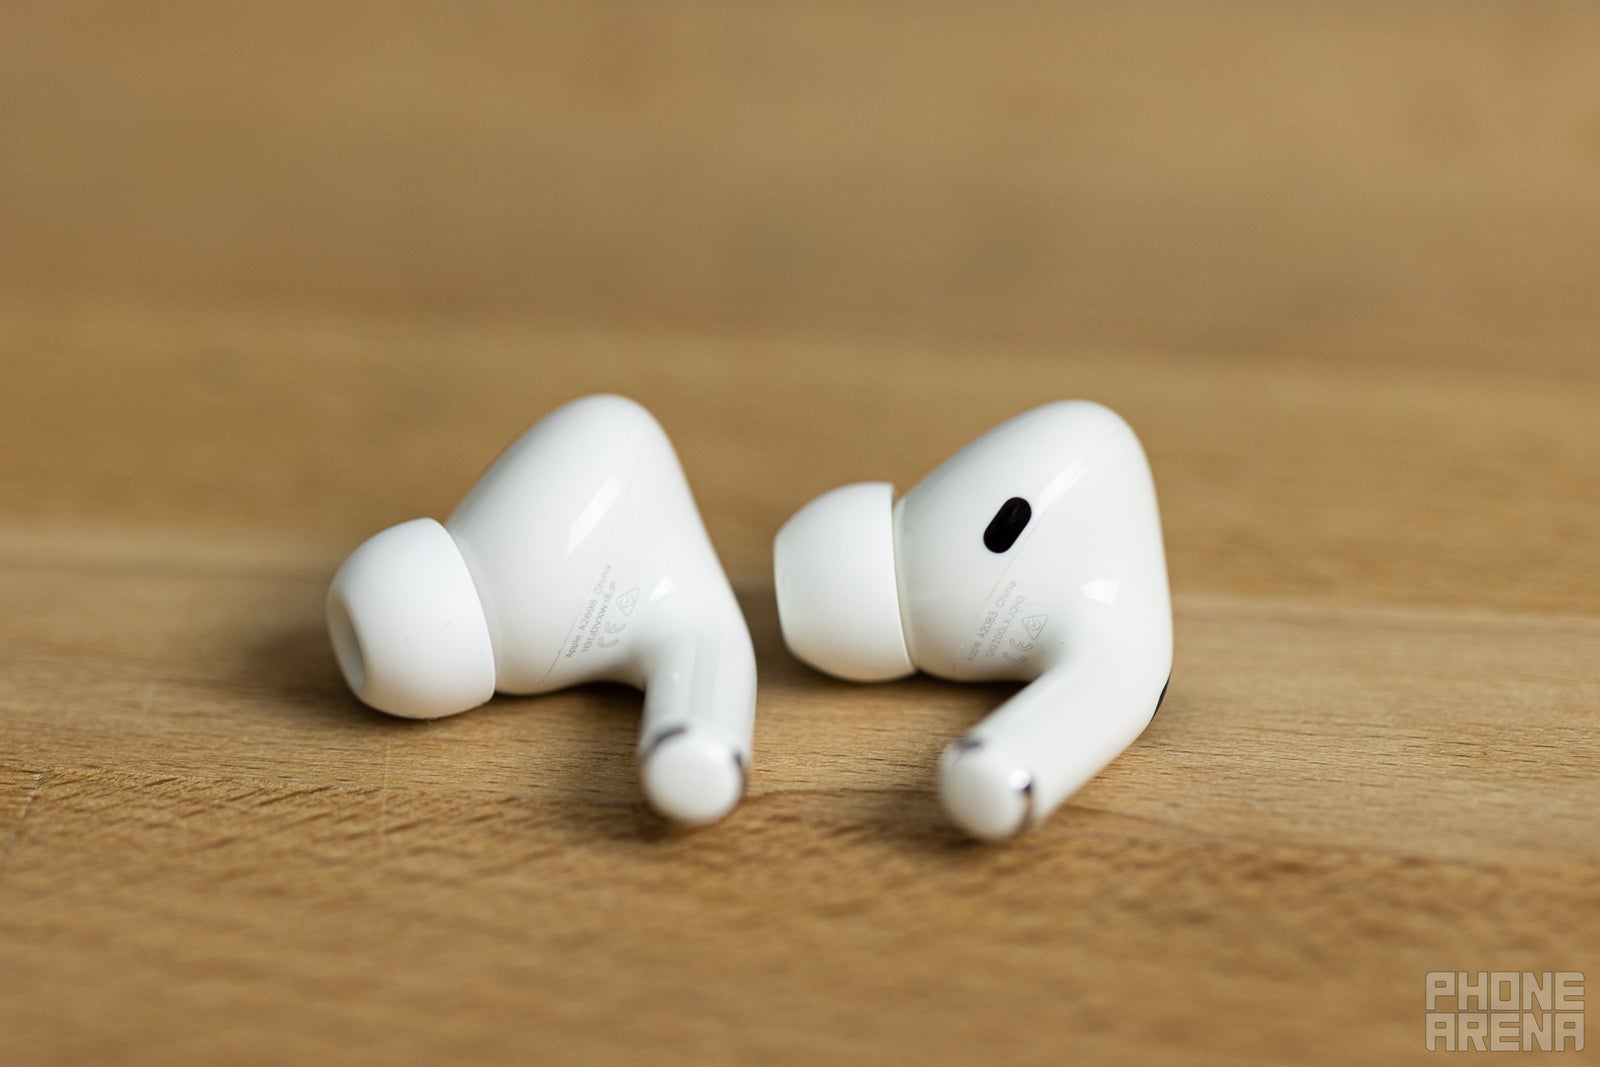 AirPods Pro 2 (left) vs AirPods Pro (right) - AirPods Pro 2 vs AirPods Pro comparison: What&#039;s different?